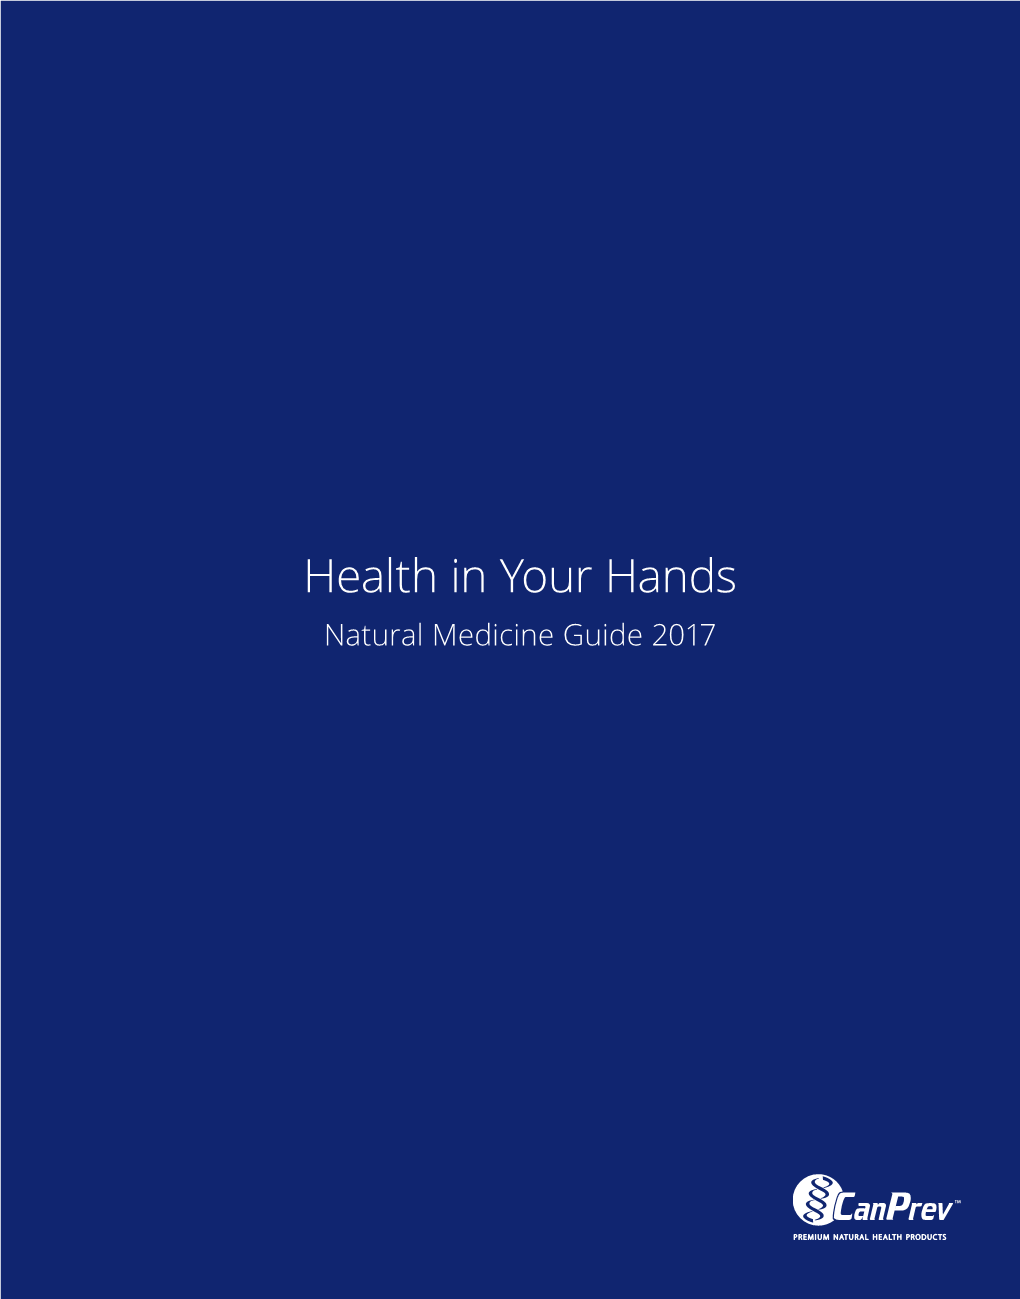 Health in Your Hands Natural Medicine Guide 2017 We Have Put Together the Information in This Book for General Educational Purposes